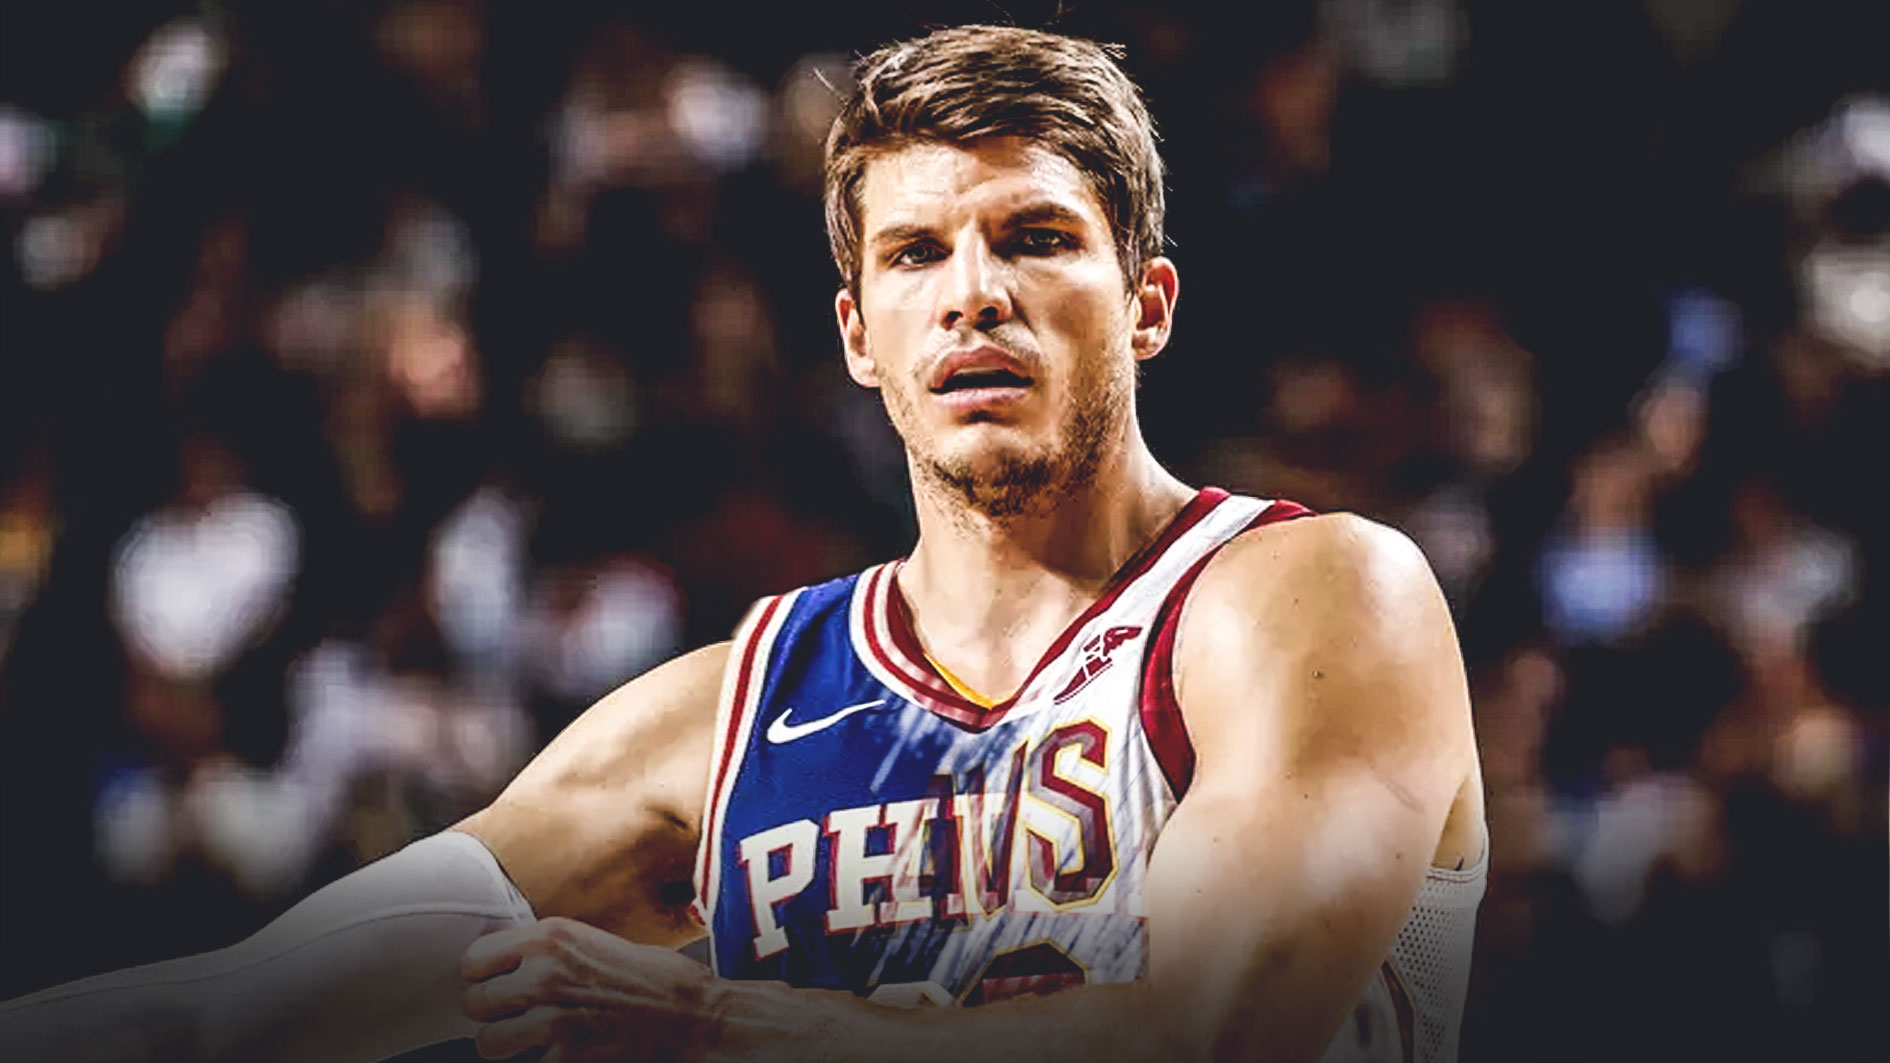 Trading for Kyle Korver would push Sixers to another level offensively